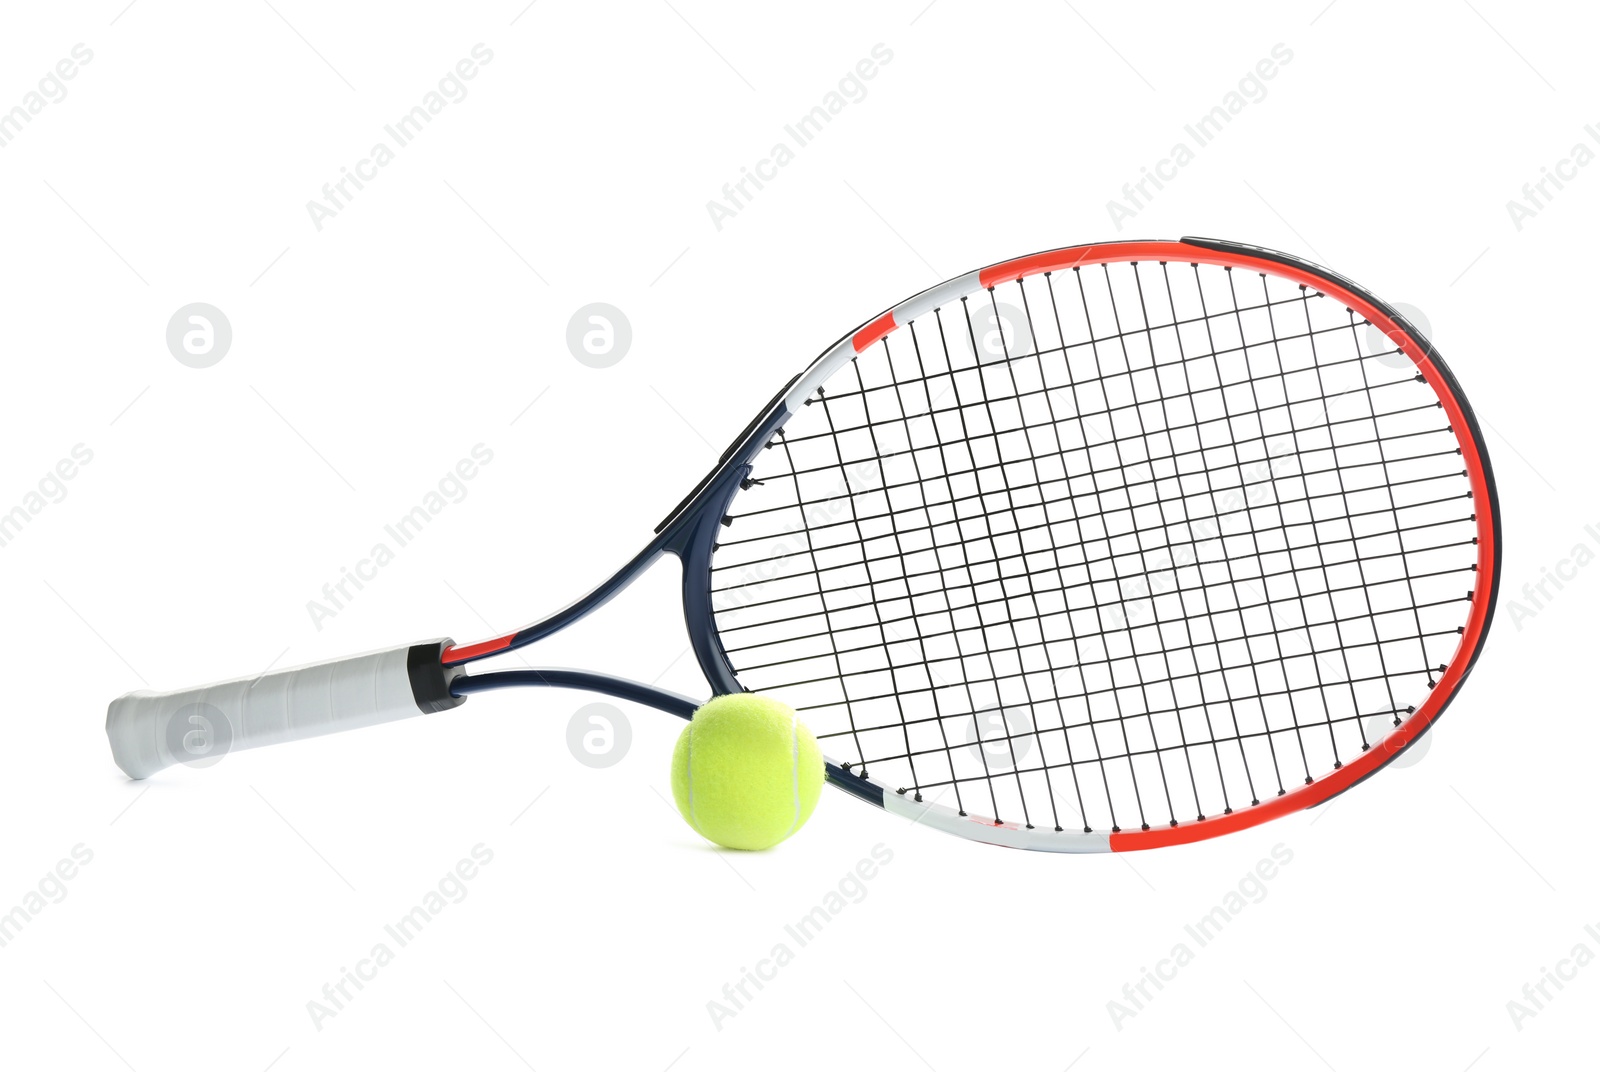 Photo of Tennis racket and ball on white background. Sports equipment